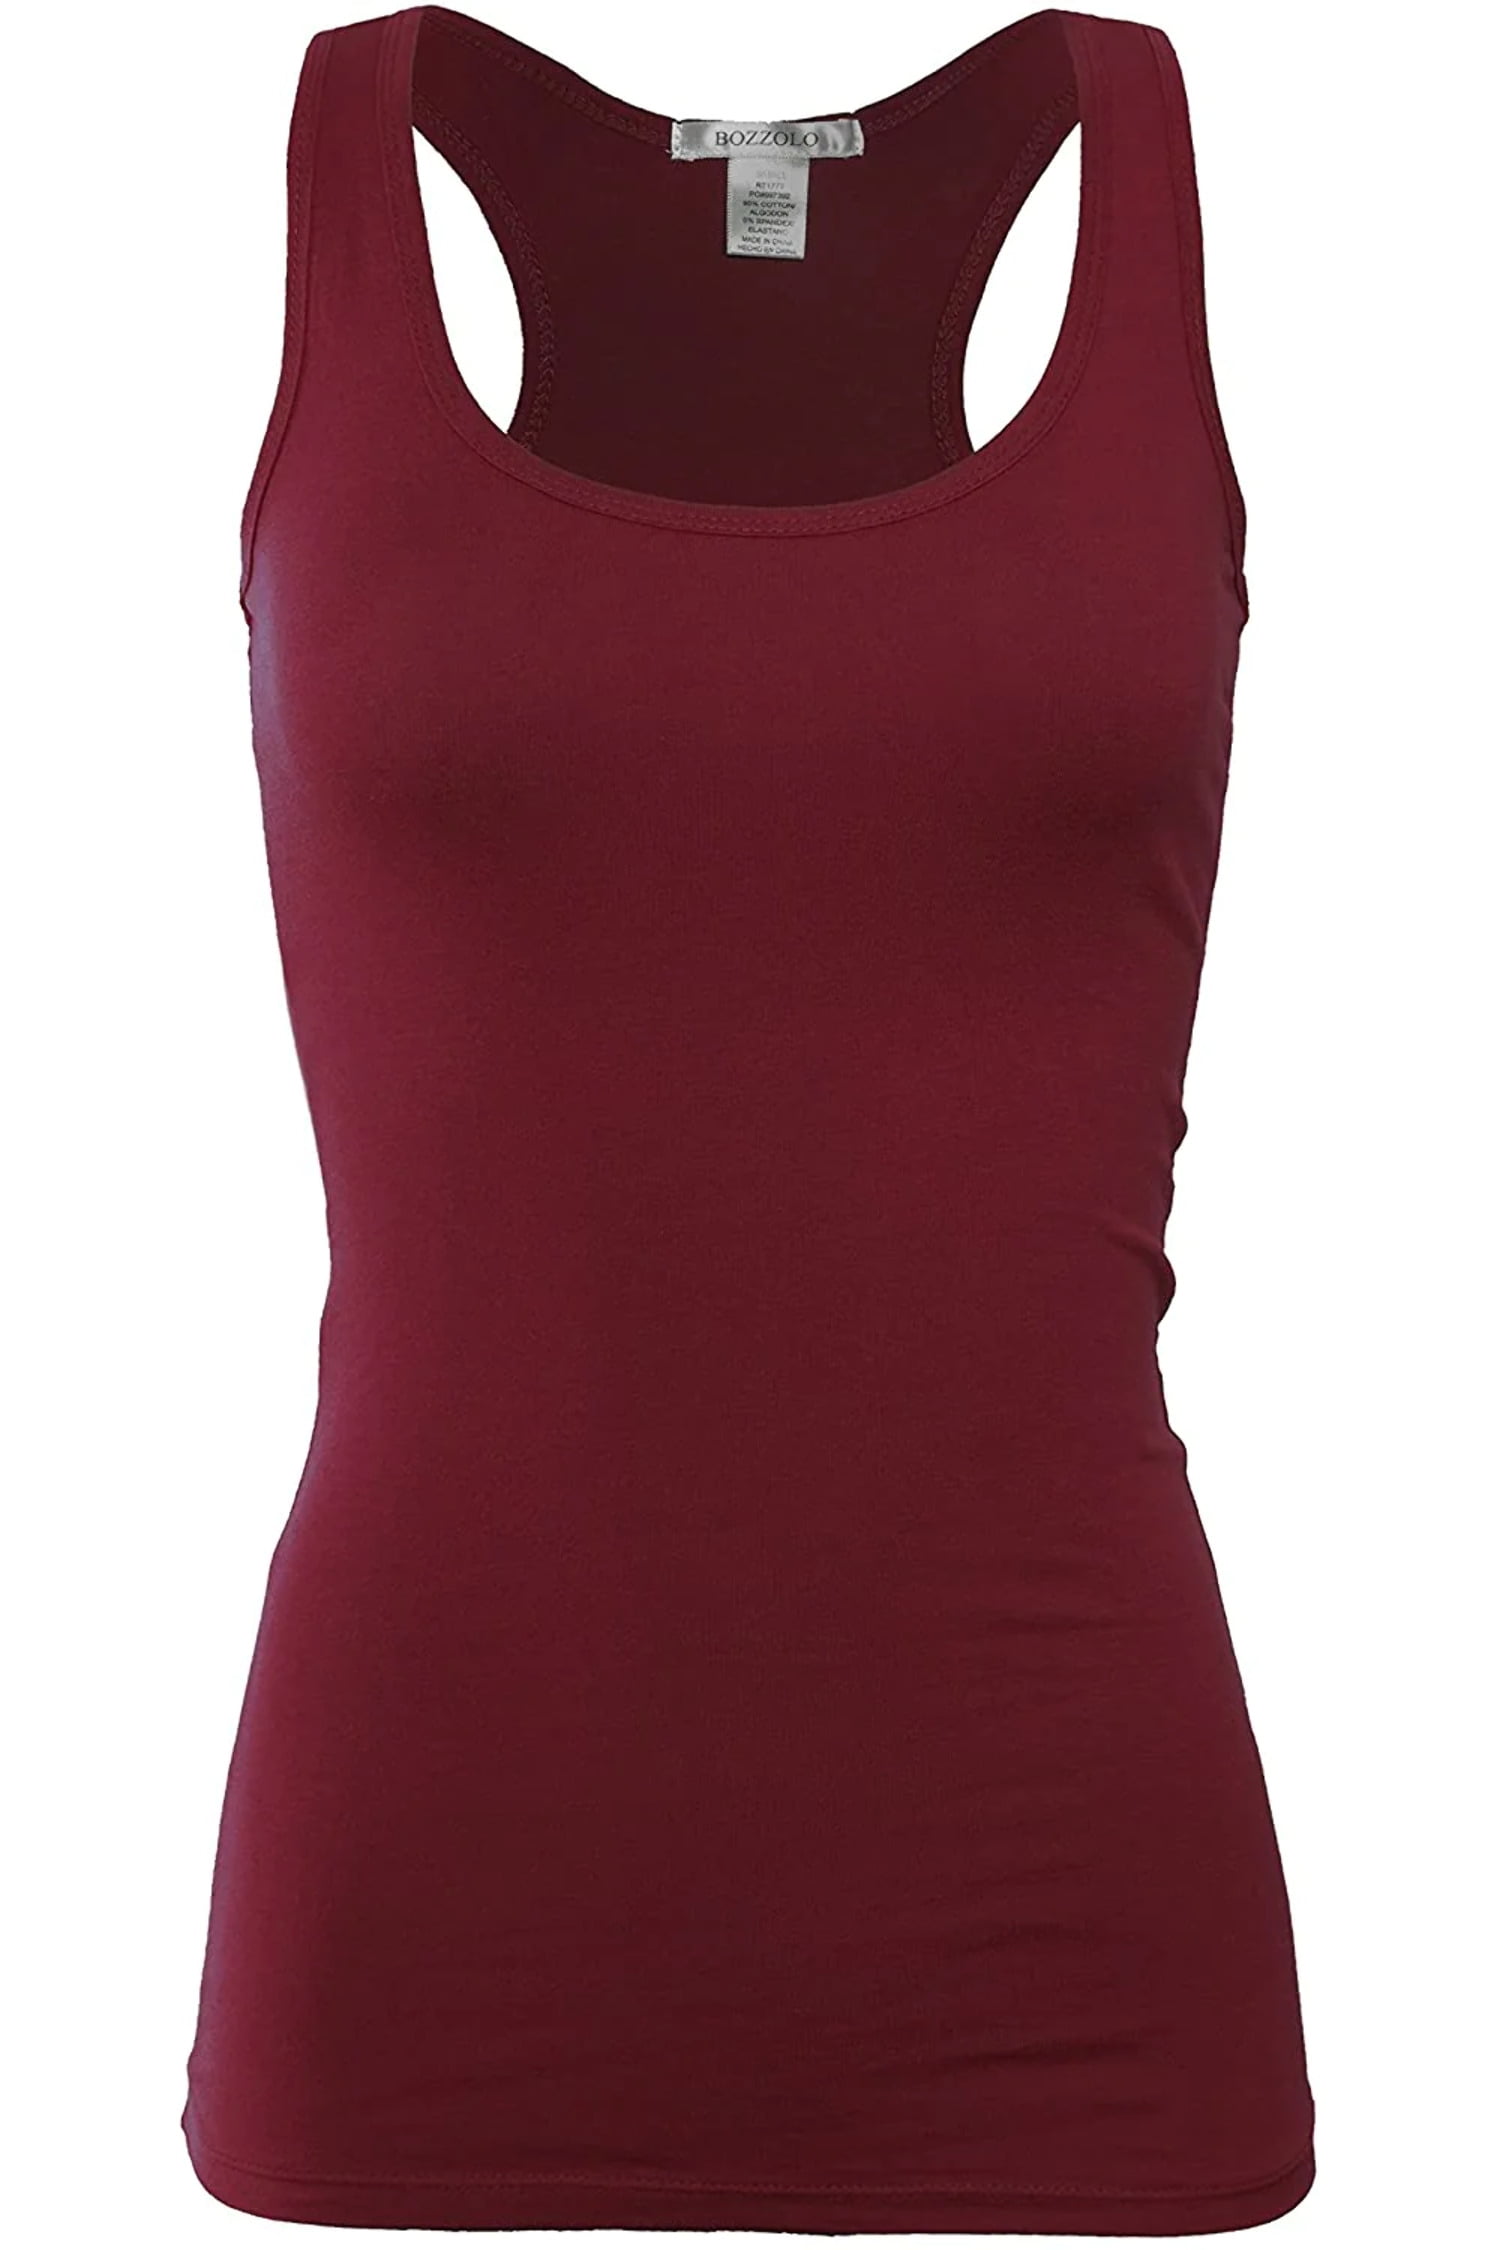 Bozzolo Women's Basic Cotton Spandex Racerback Solid Plain Fitted Tank ...